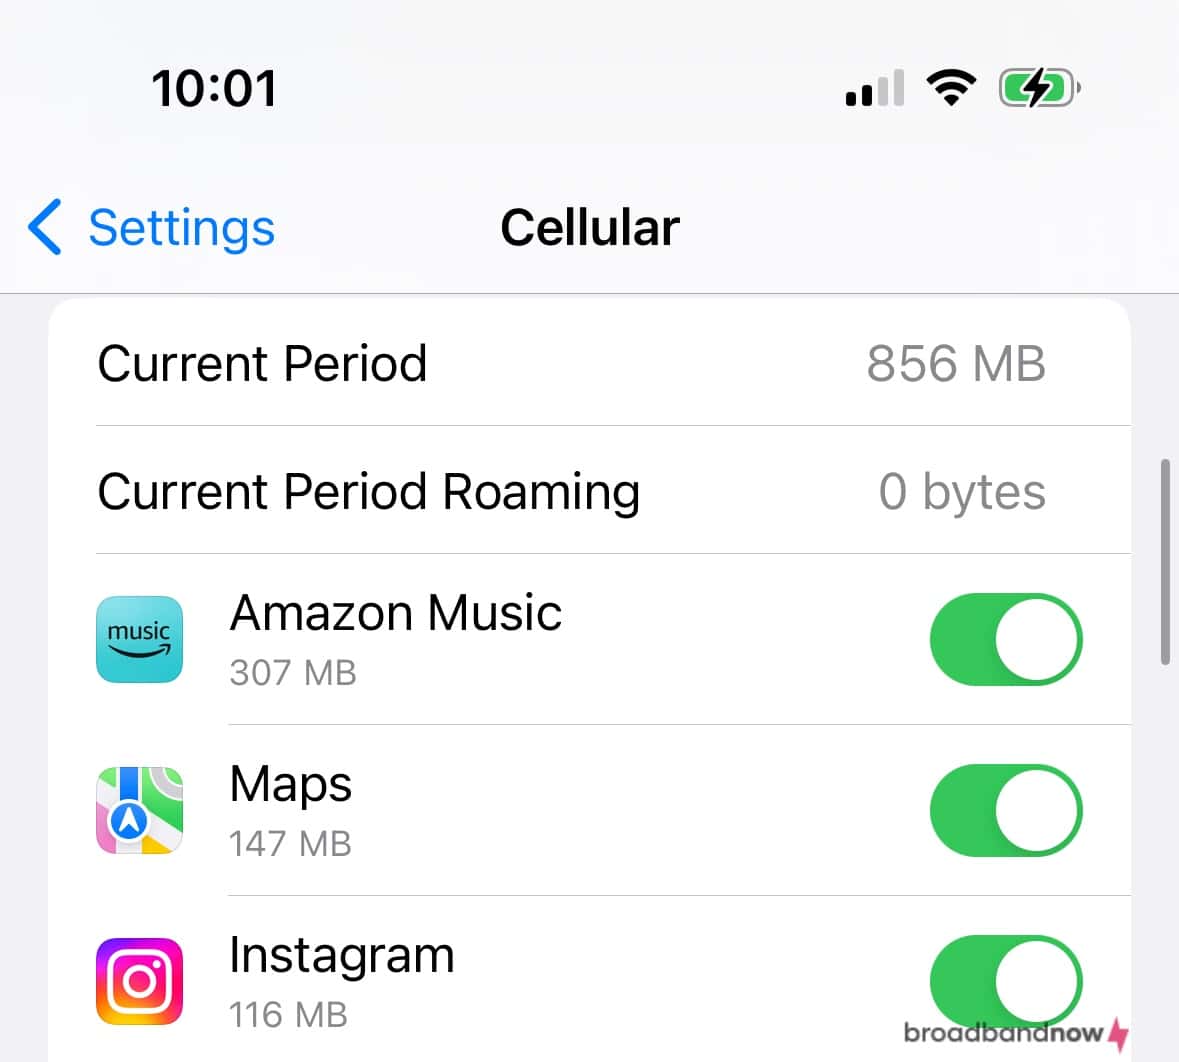 Screenshot of cellular settings on an iPhone device